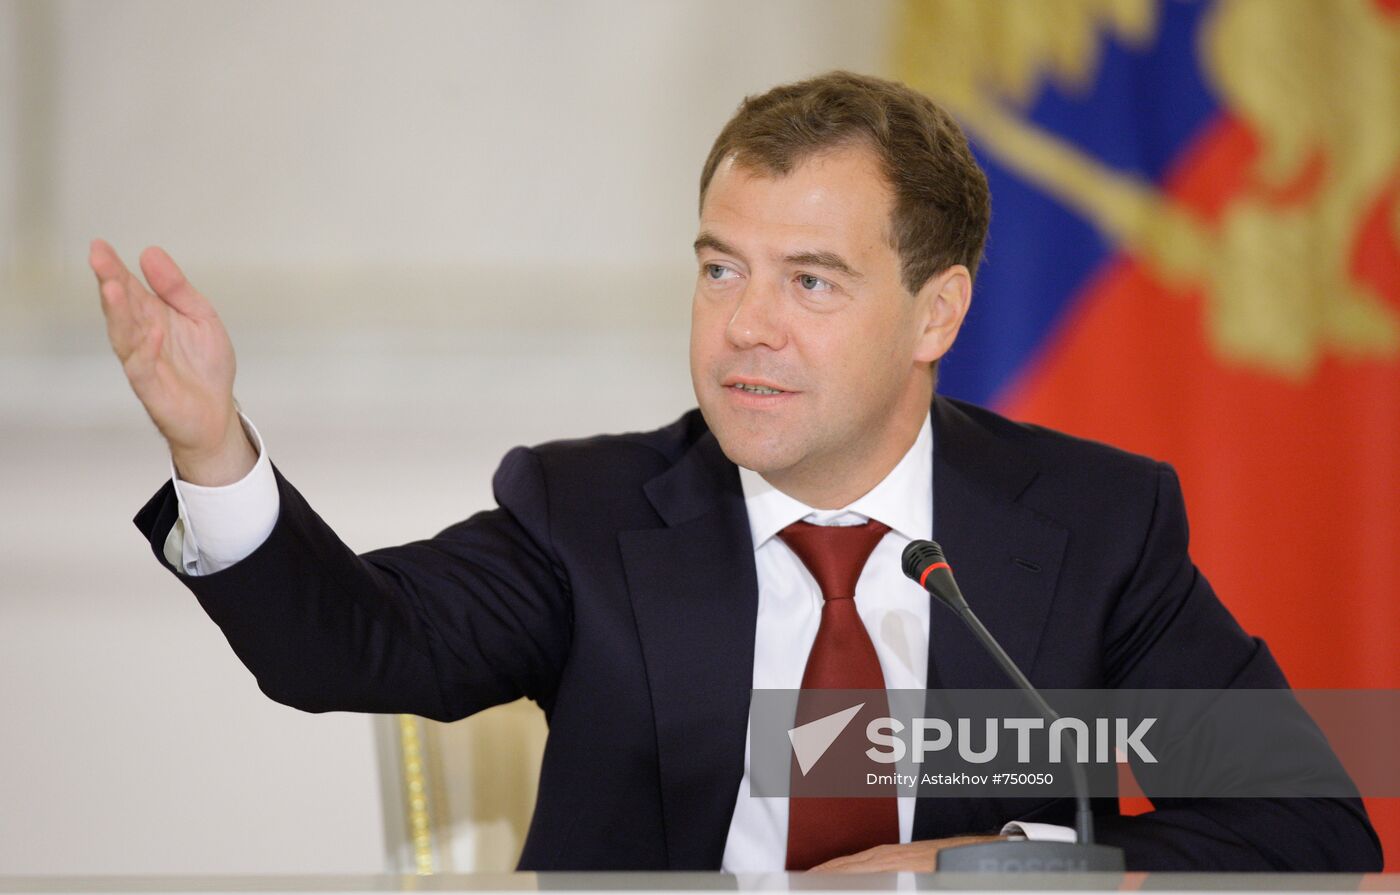 Dmitry Medvedev chairs meeting of Federation Council